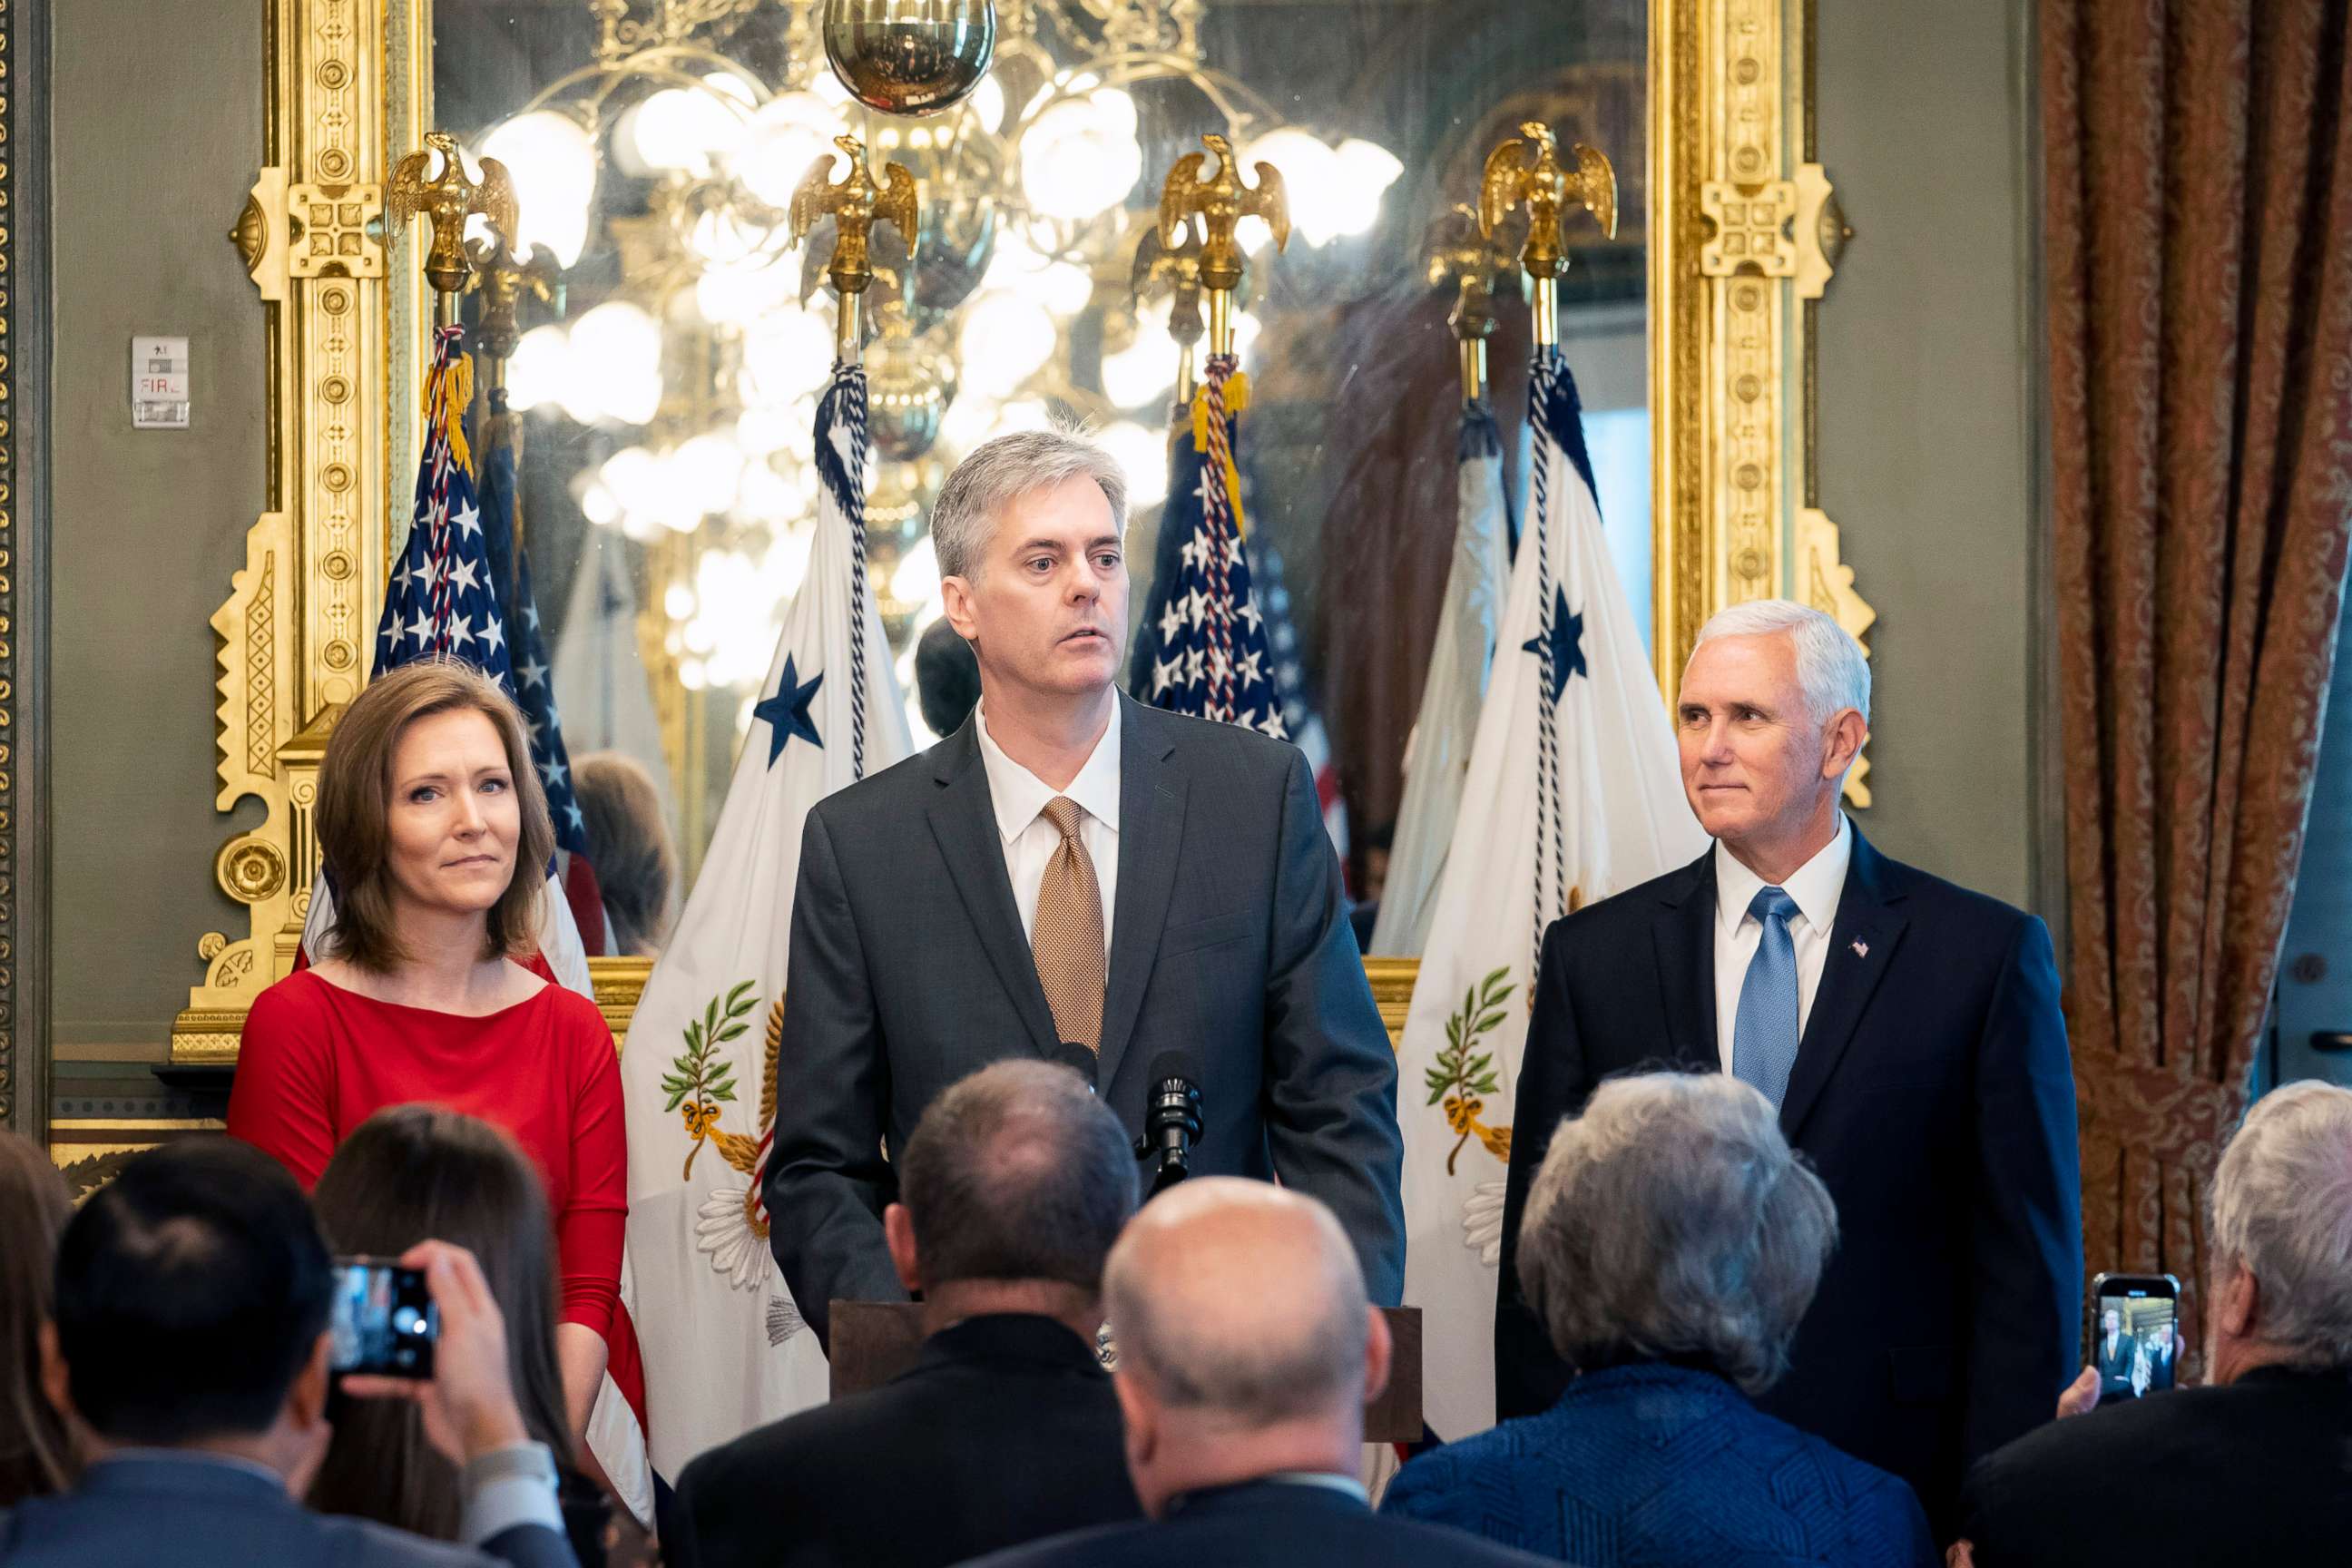 PHOTO: Stephen Akard, seen here at his swearing-in ceremony with Vice President Pence, resigned as acting Inspector General and Director of the Office of Foreign Missions at the State Department.